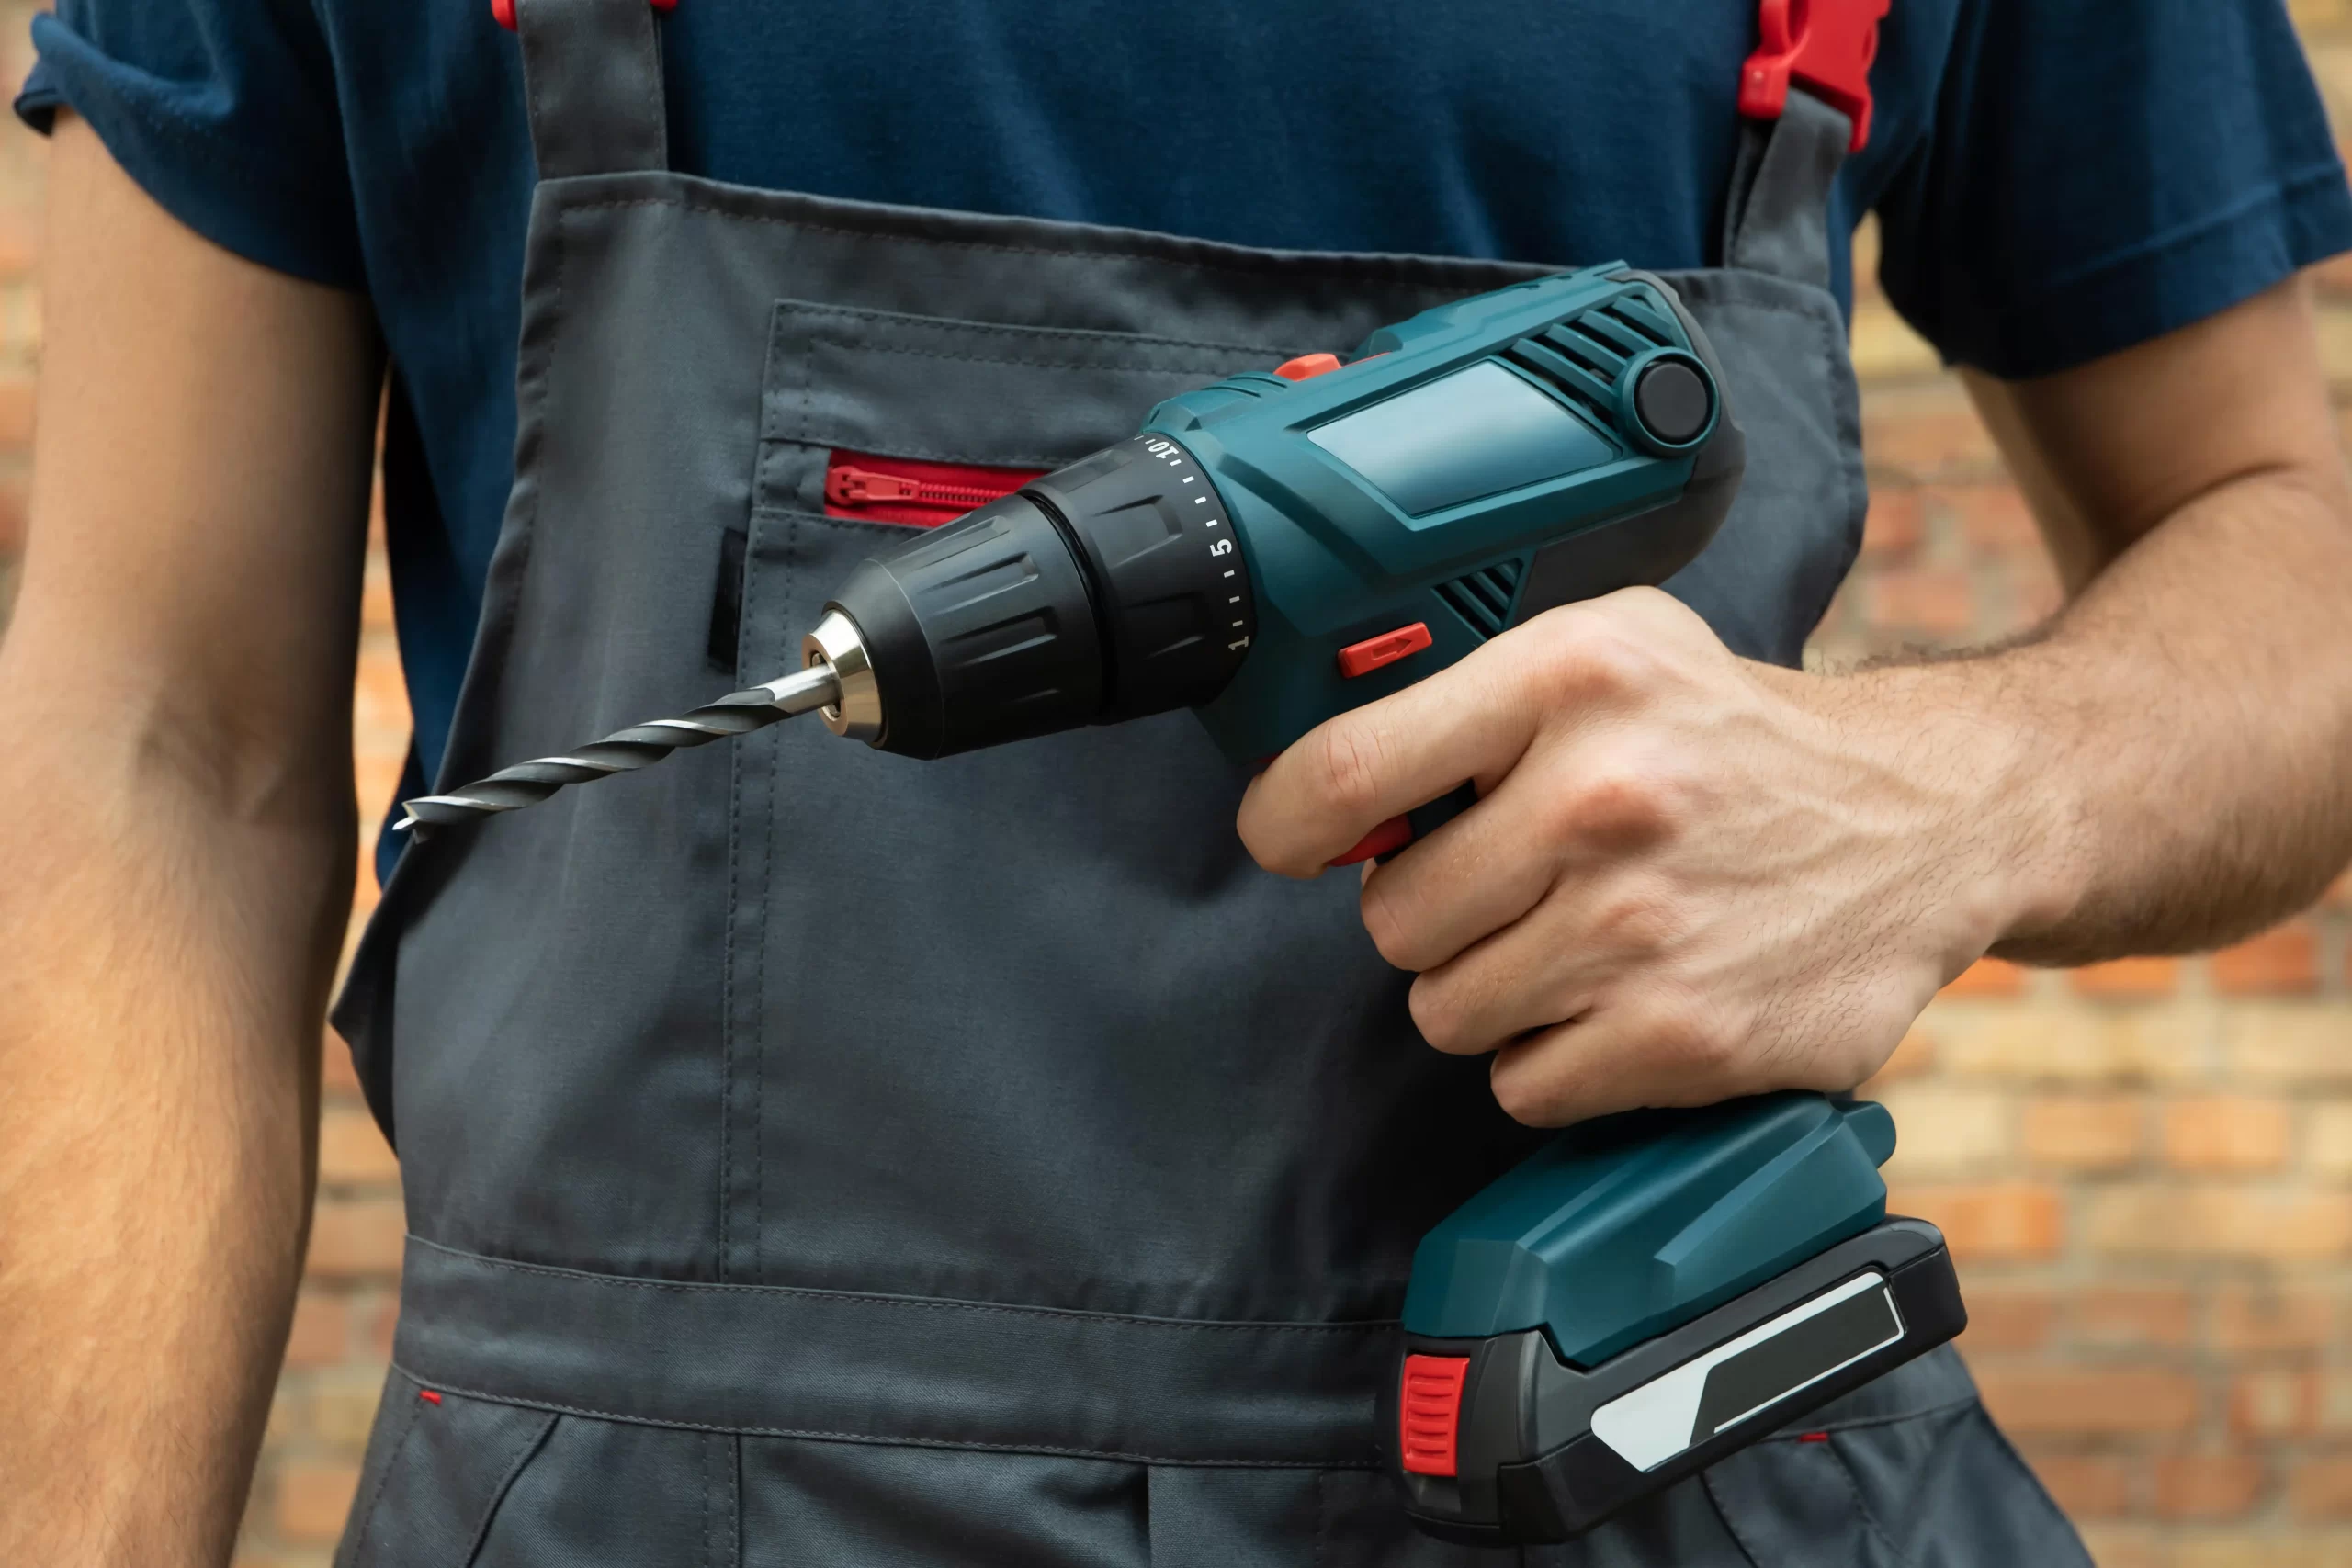 Precision Unplugged The Art of Crafting with Global Power Cordless Drills